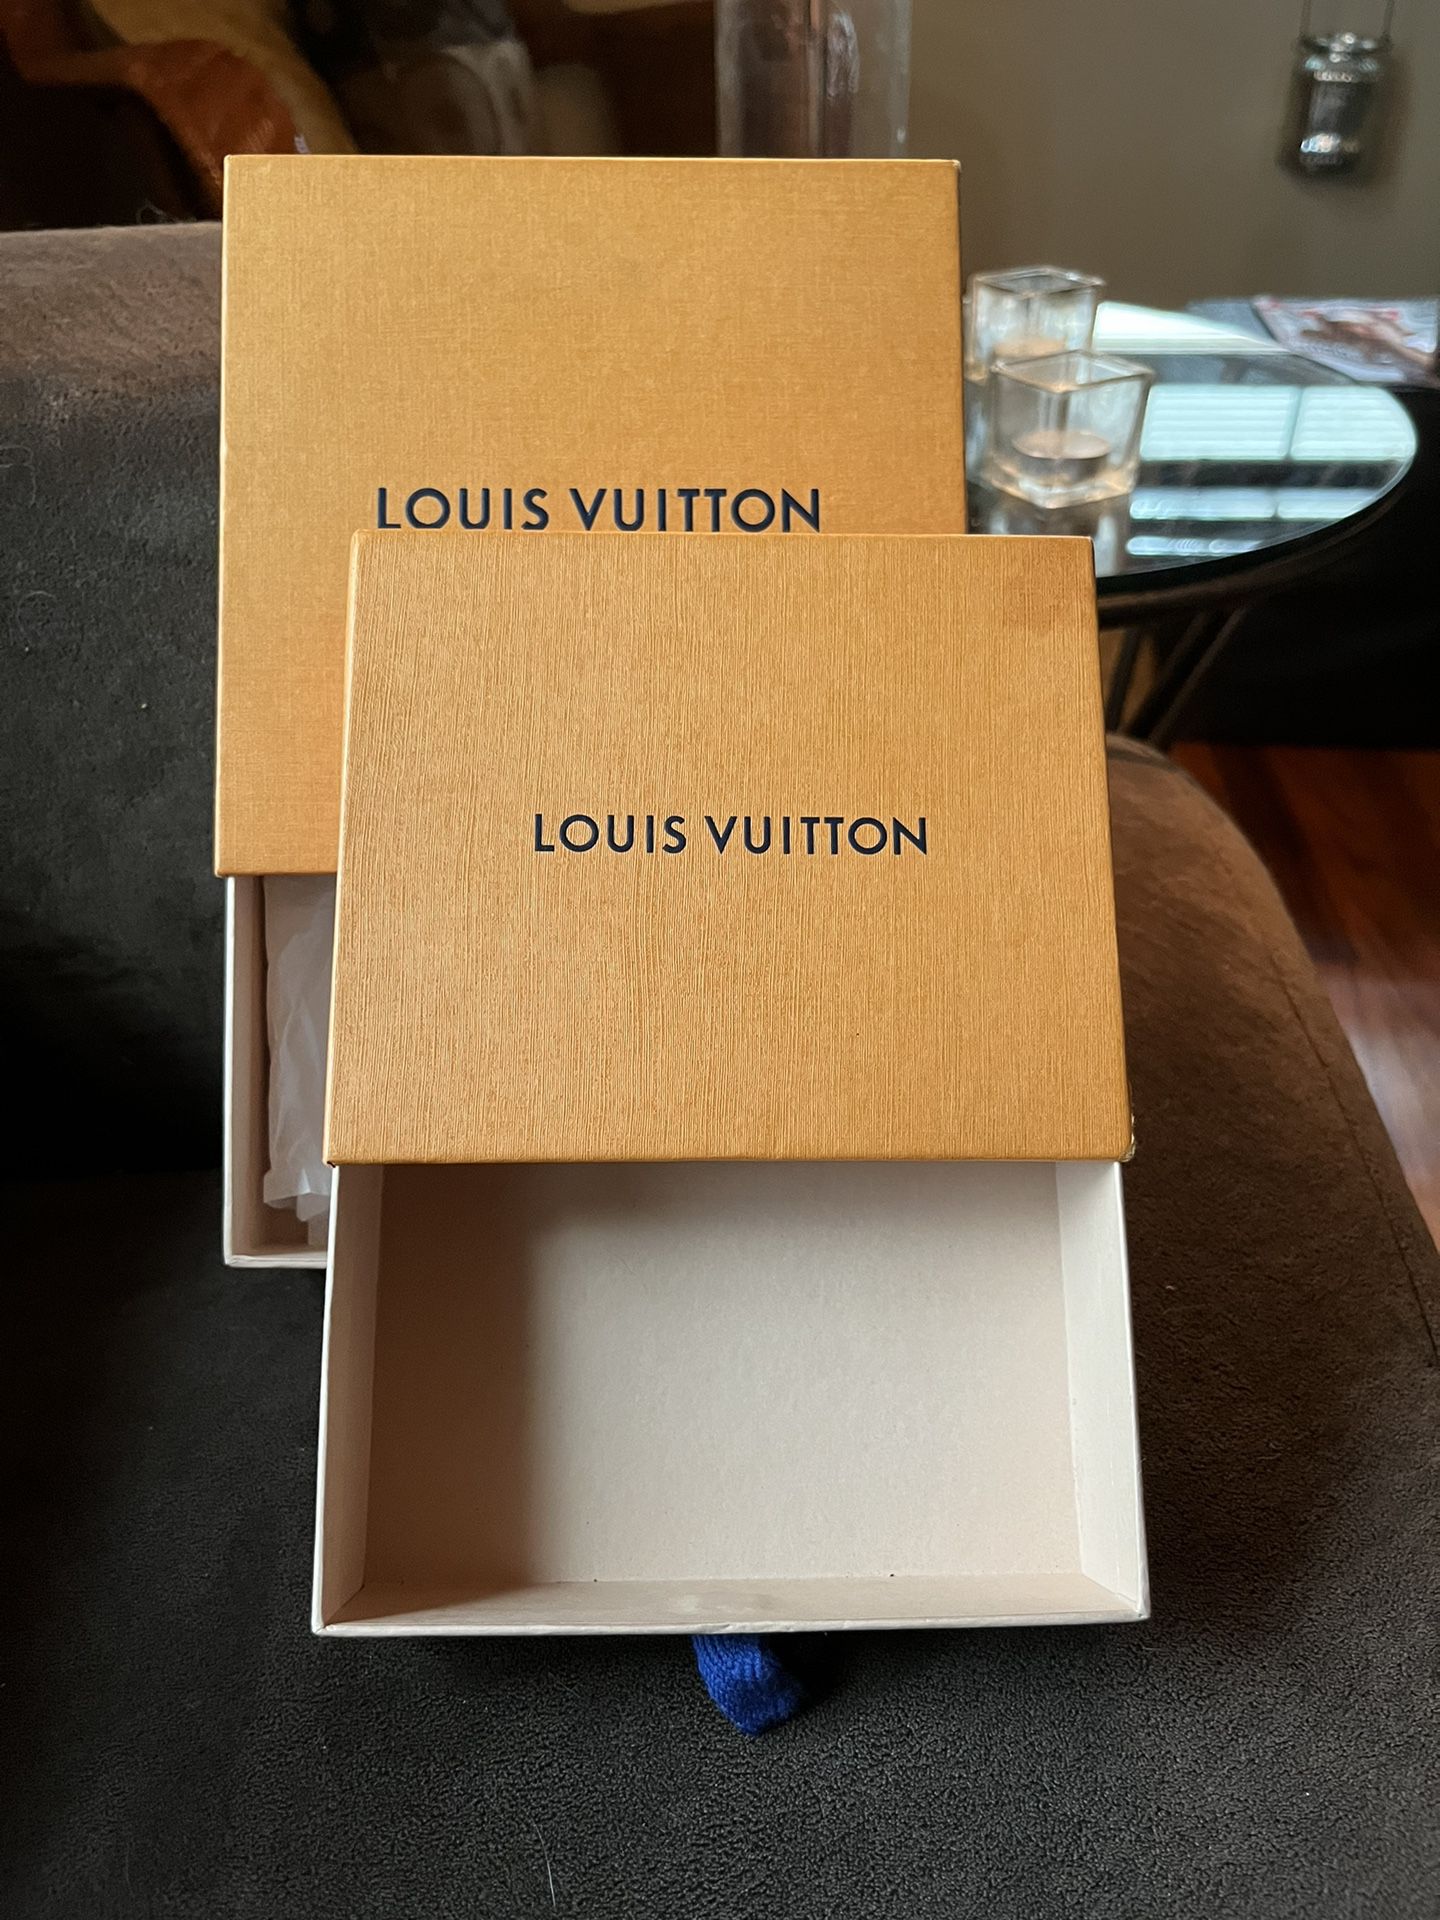 LV BOXES. ONE IS SLIGHTLY BIGGER THAN THE OTHER. 